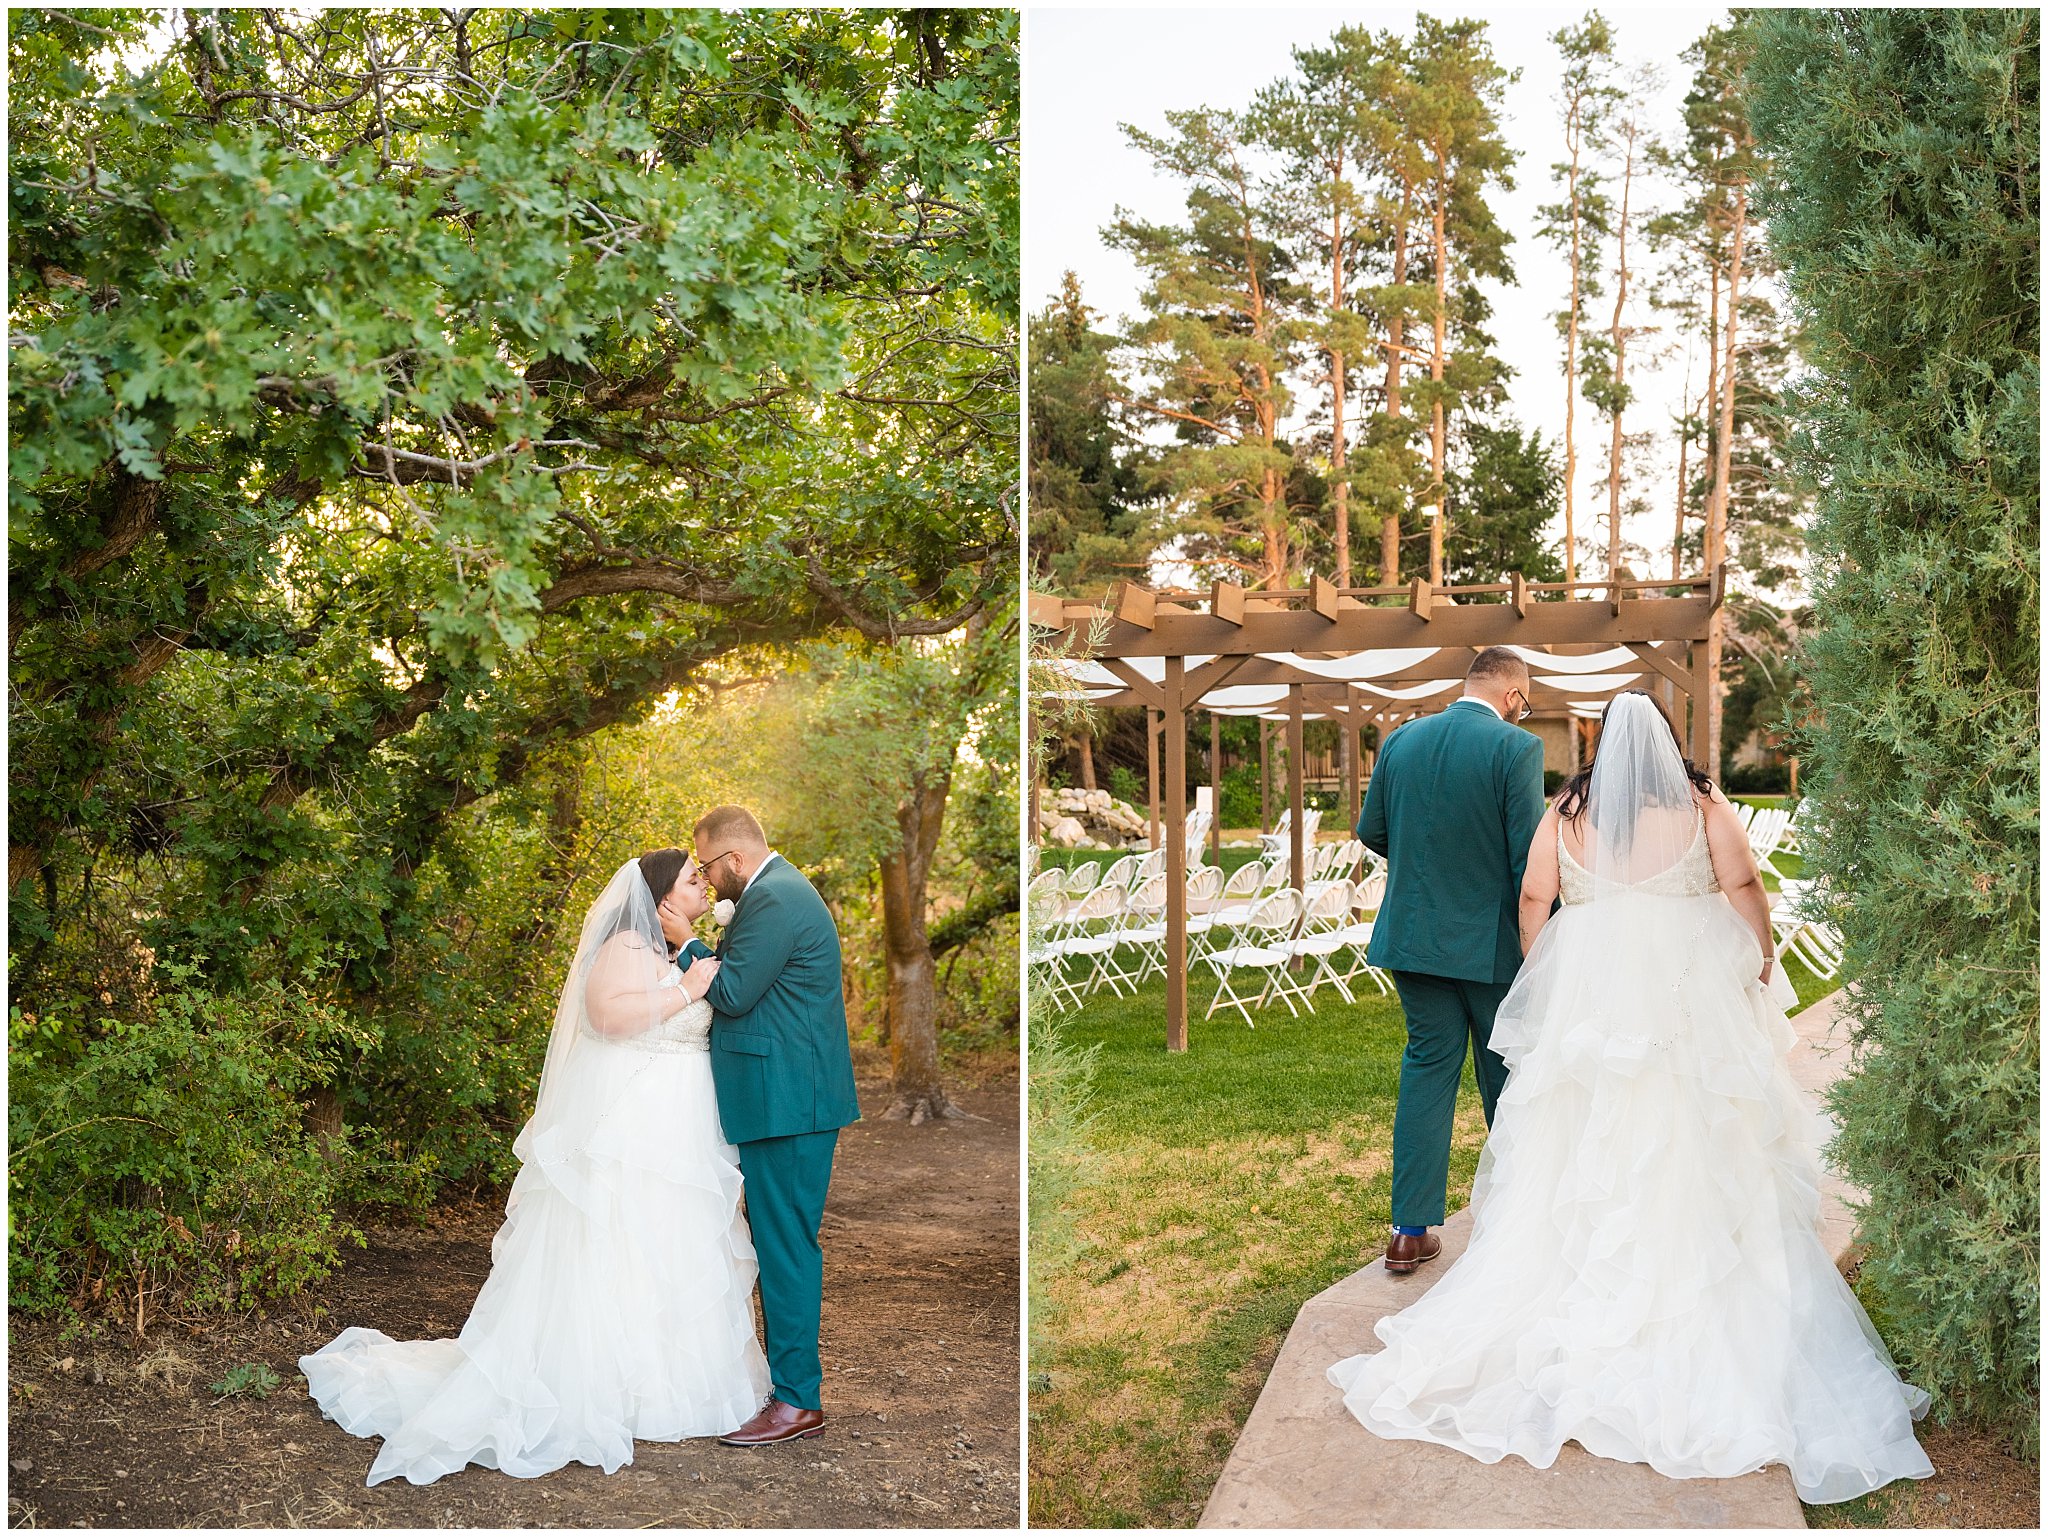 Bride and groom couple's portraits in the woods. Wearing a green suit with salmon pink tie | Green and Salmon Pink Utah Wedding | Oak Hills | Jessie and Dallin Photography